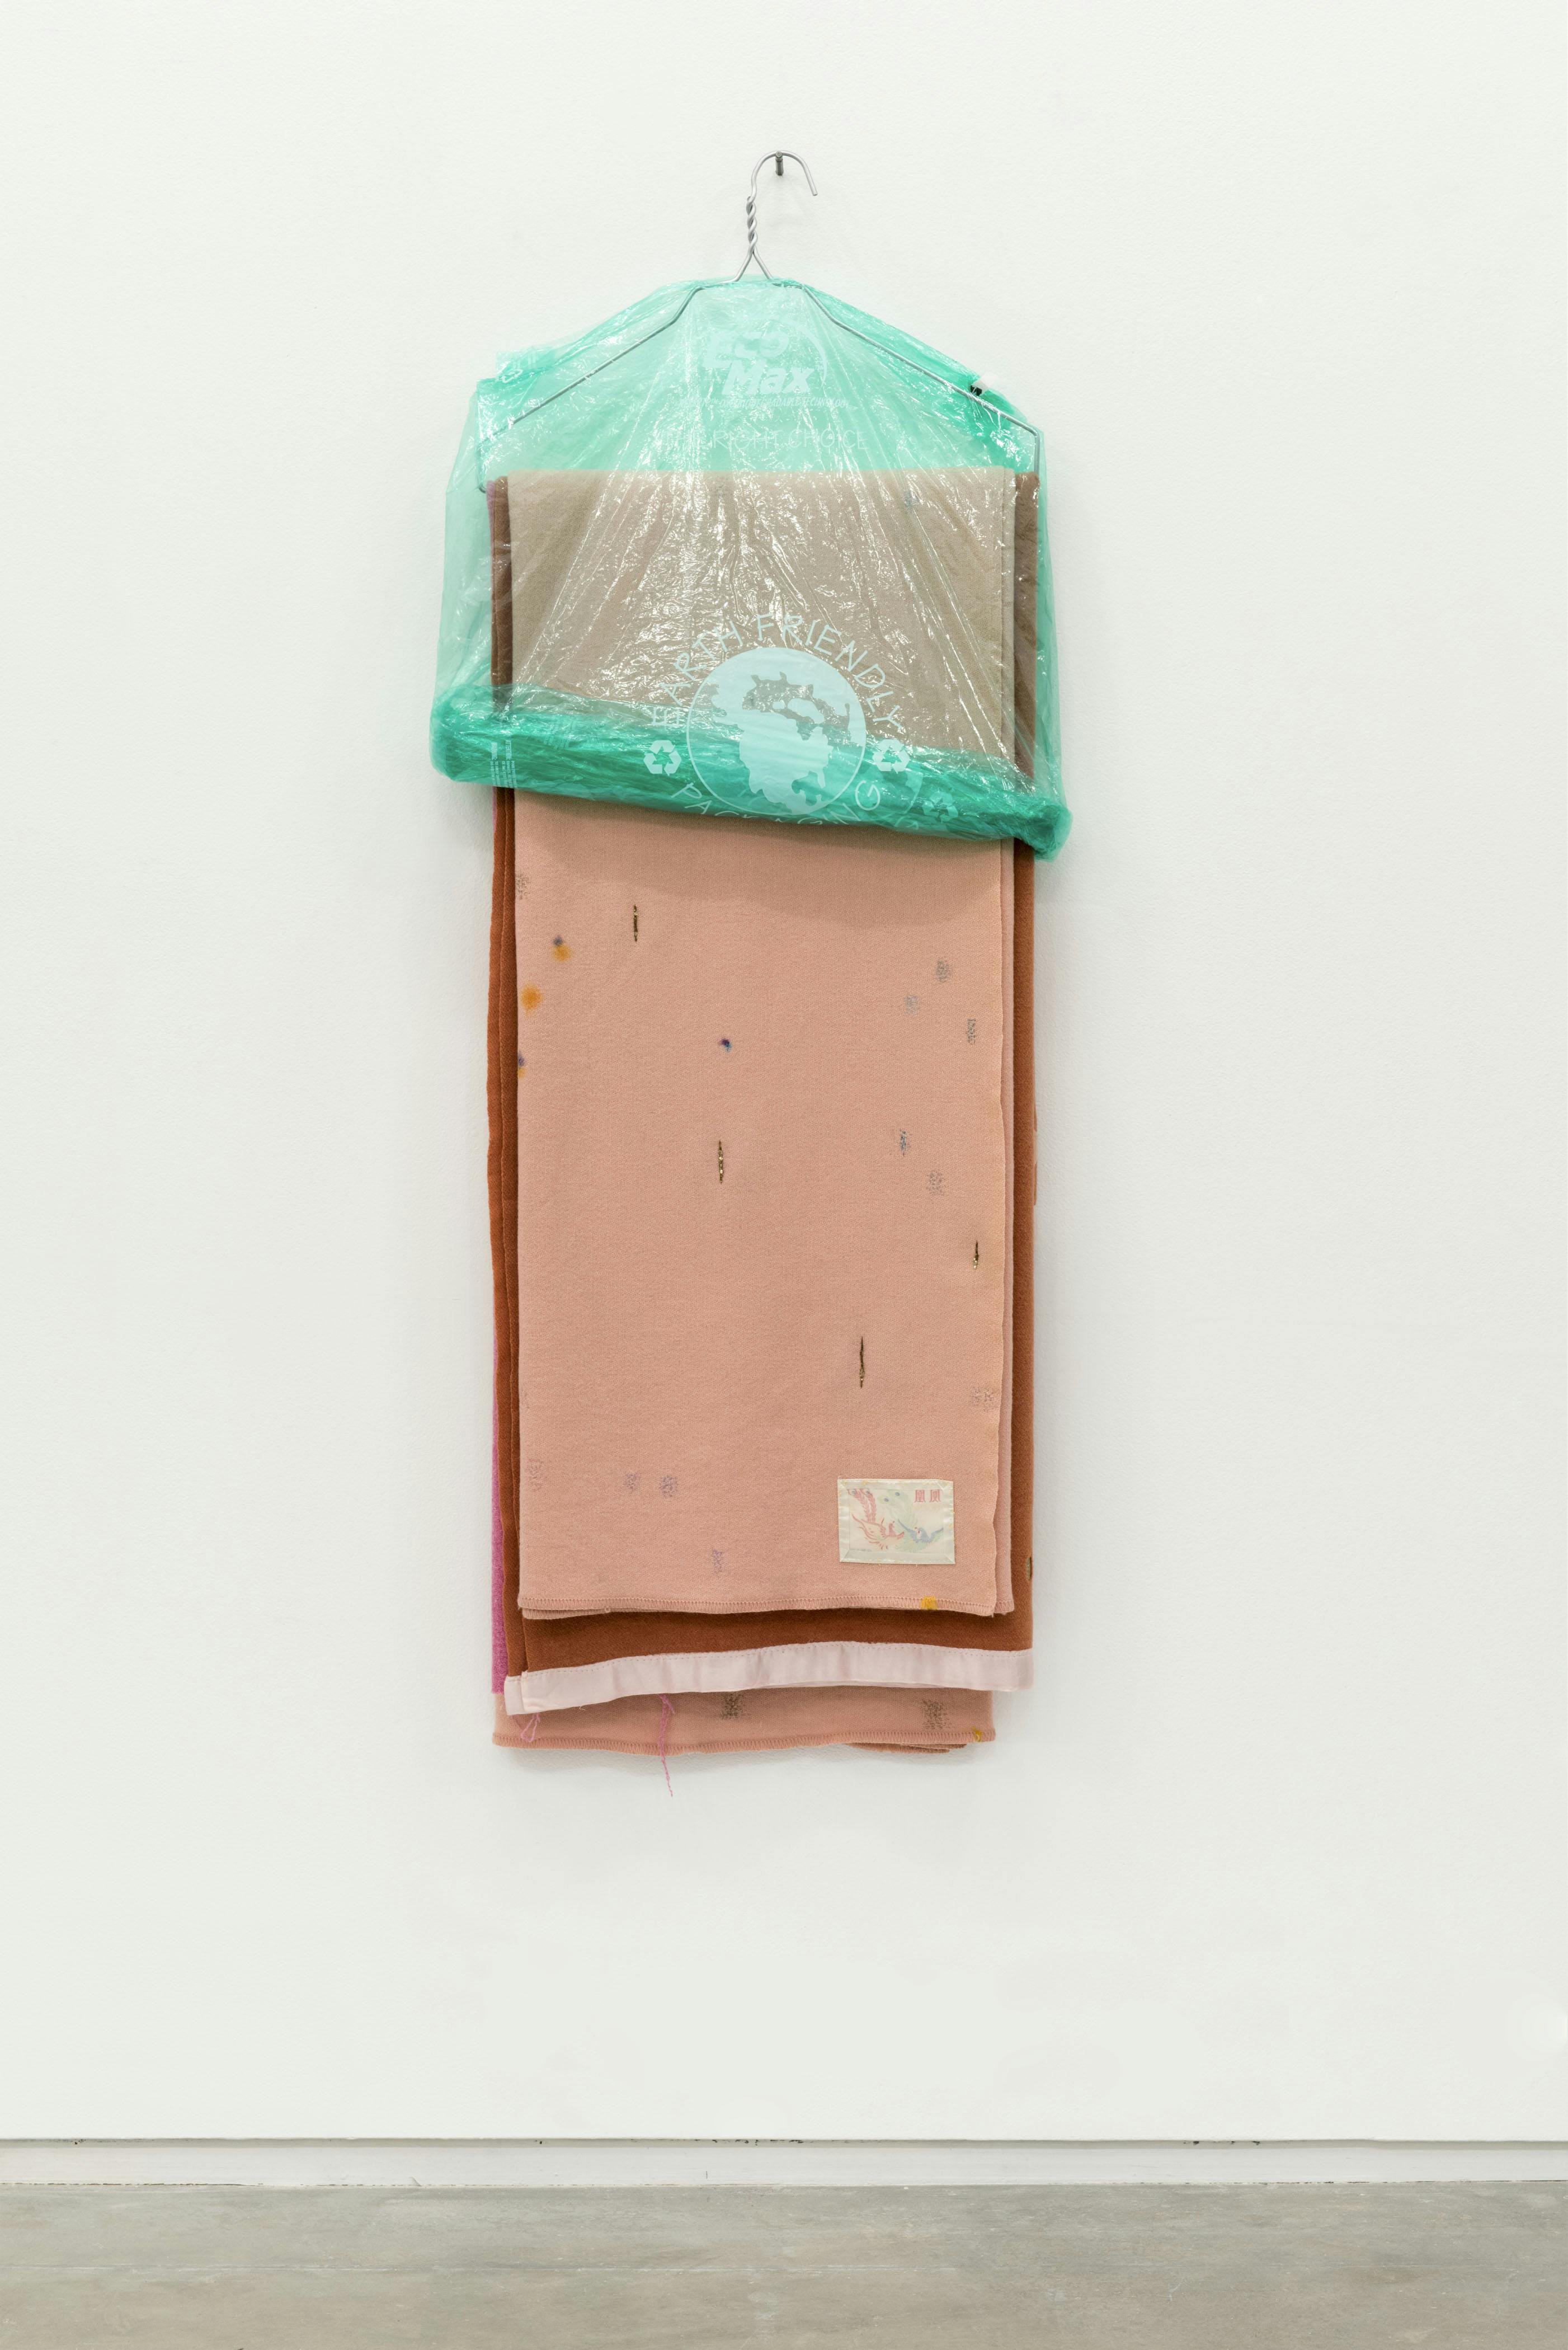 Peach and brown coloured textiles are draped on a wire-hanger which hangs on a gallery wall. A green, plastic garment bag covers half of the textile.